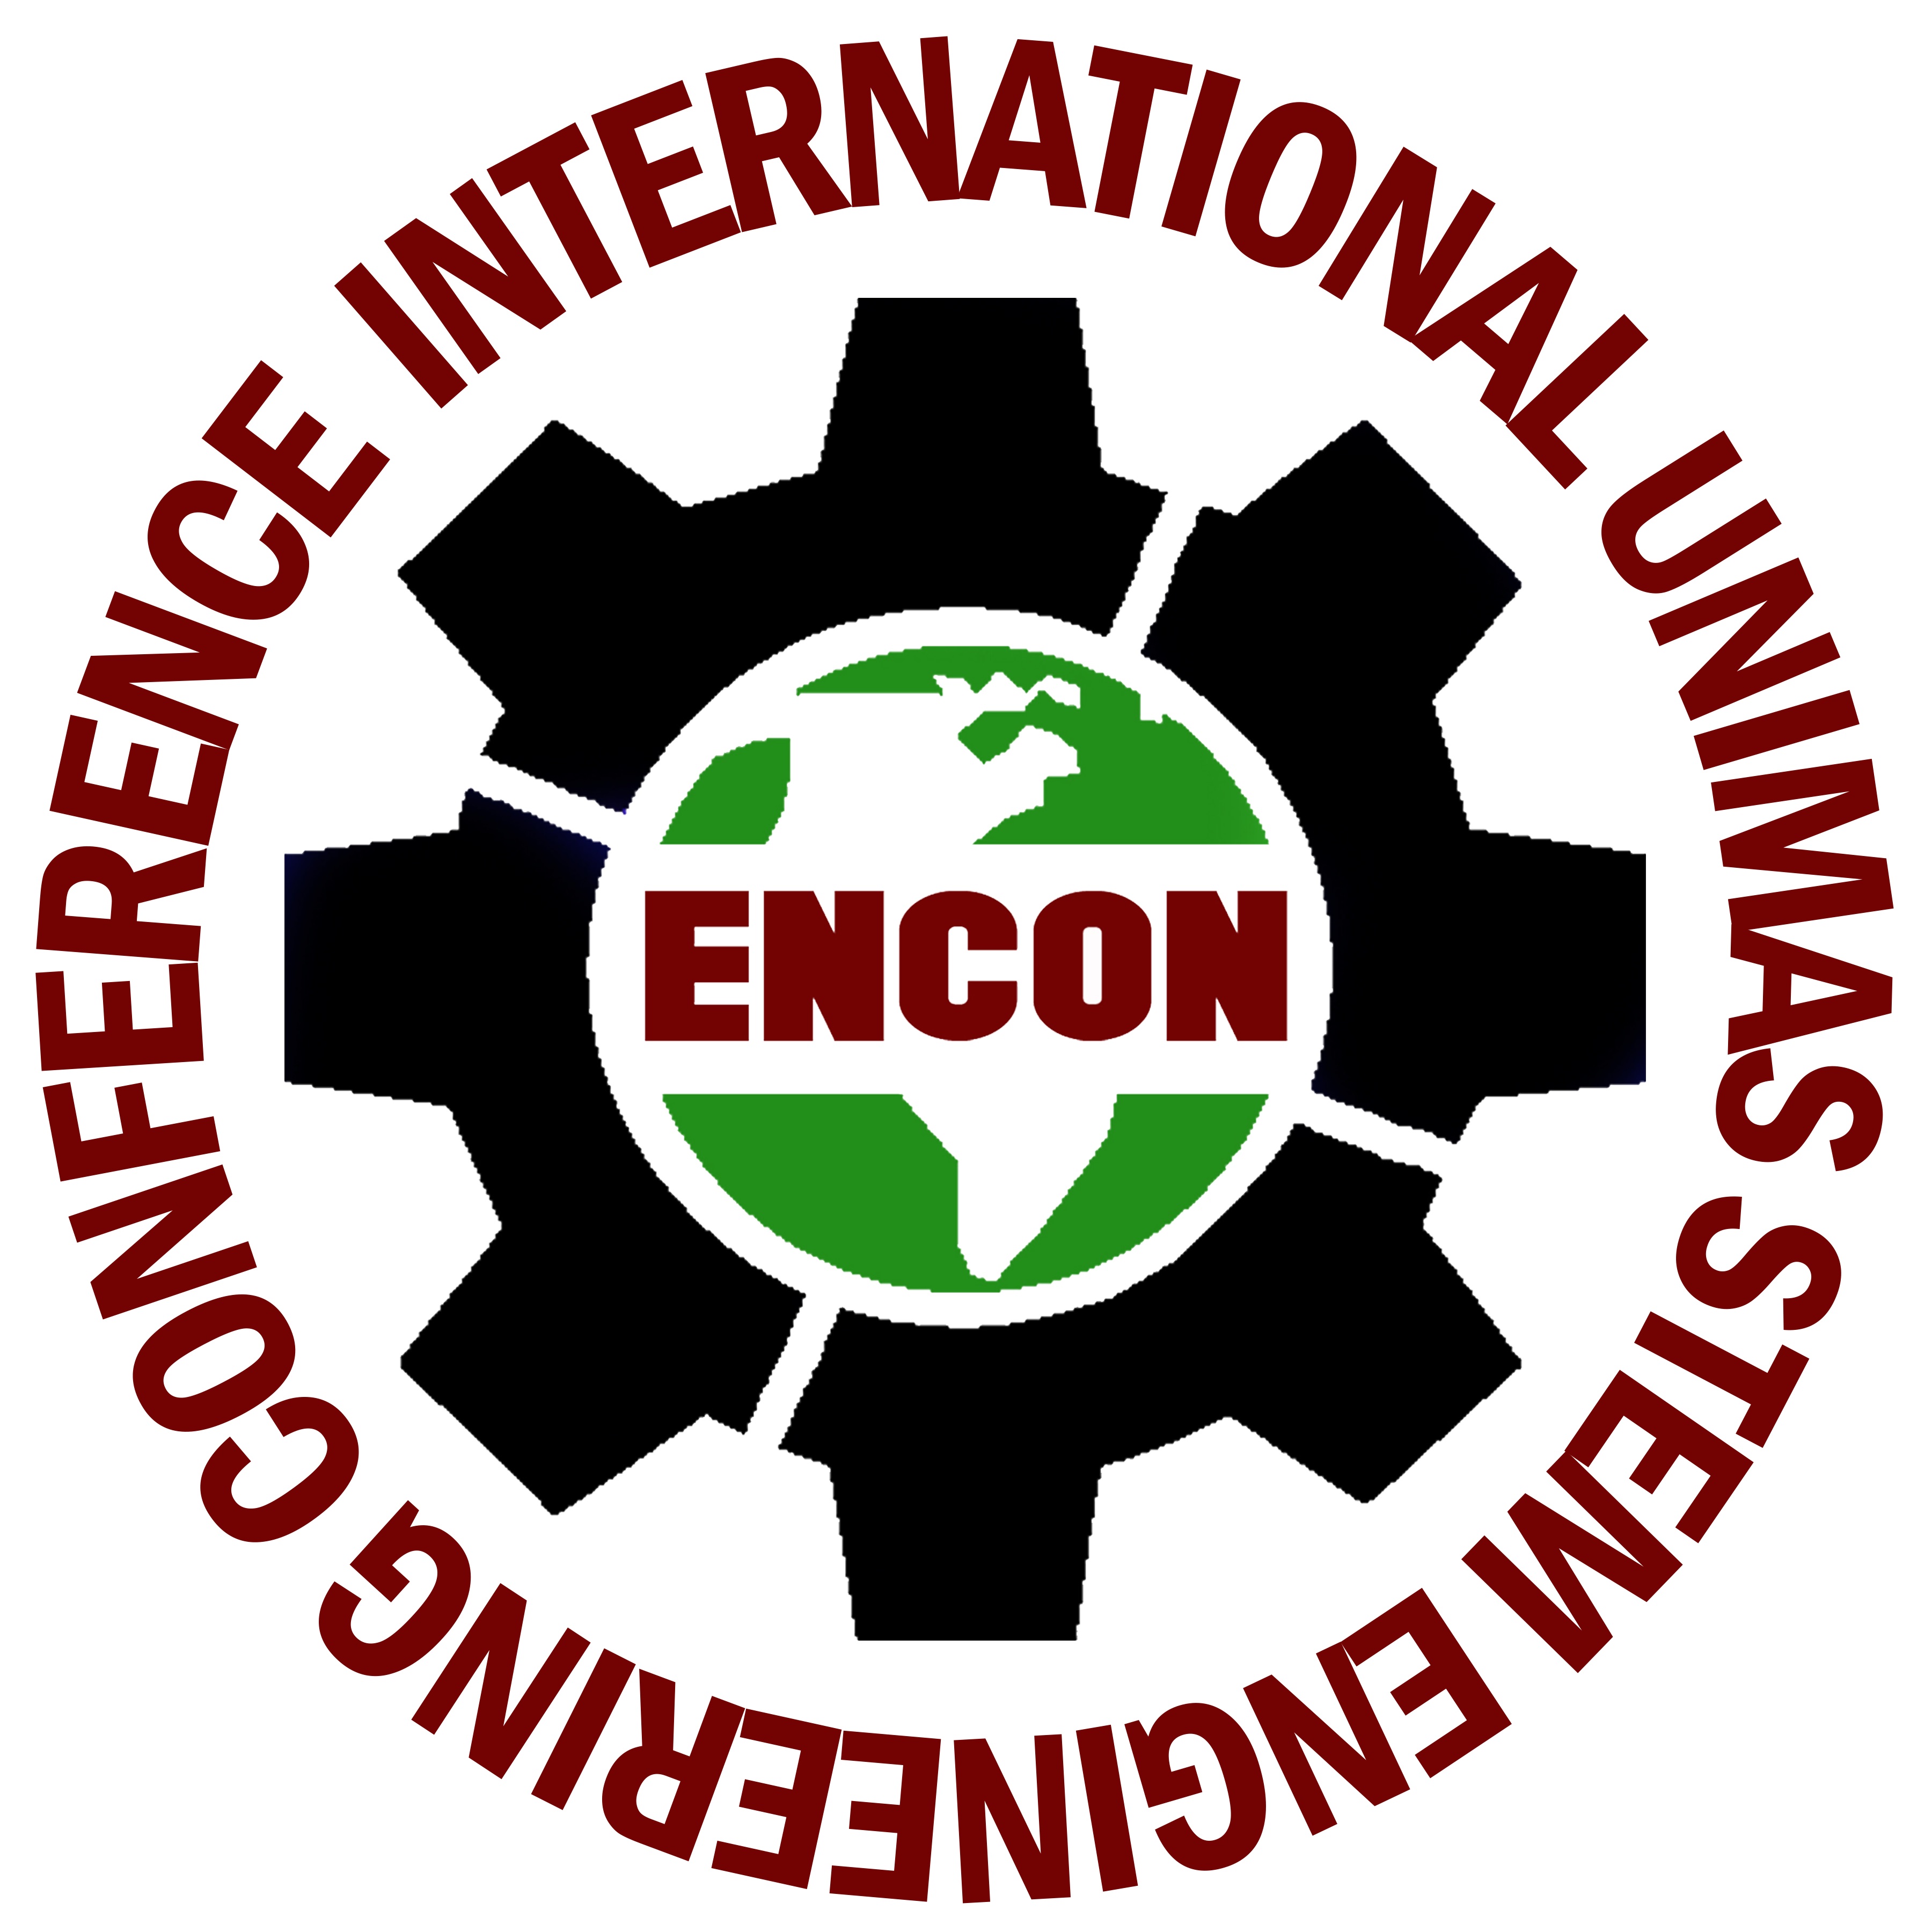 International UNIMAS STEM 10th Engineering Conference 2017 EnCon2017 will be held from September 13 to 15, 2017 in the beautiful city of Kuching, Sarawak. The theme for this year conference is �Gearing Towards a Greener Future'. 
Interested authors are invited to submit unpublished contributions from a broad range of topics related to engineering, including but not limited to the following fields:

Mechanical Engineering
Manufacturing Engineering
Electrical Engineering
Electronics Engineering
Civil and Structural Engineering
Chemical Engineering
STEM Education

All accepted and presented papers will be published in one of the SCOPUS indexed journals listed in the conference website at http:www.conference.unimas.my2017encon